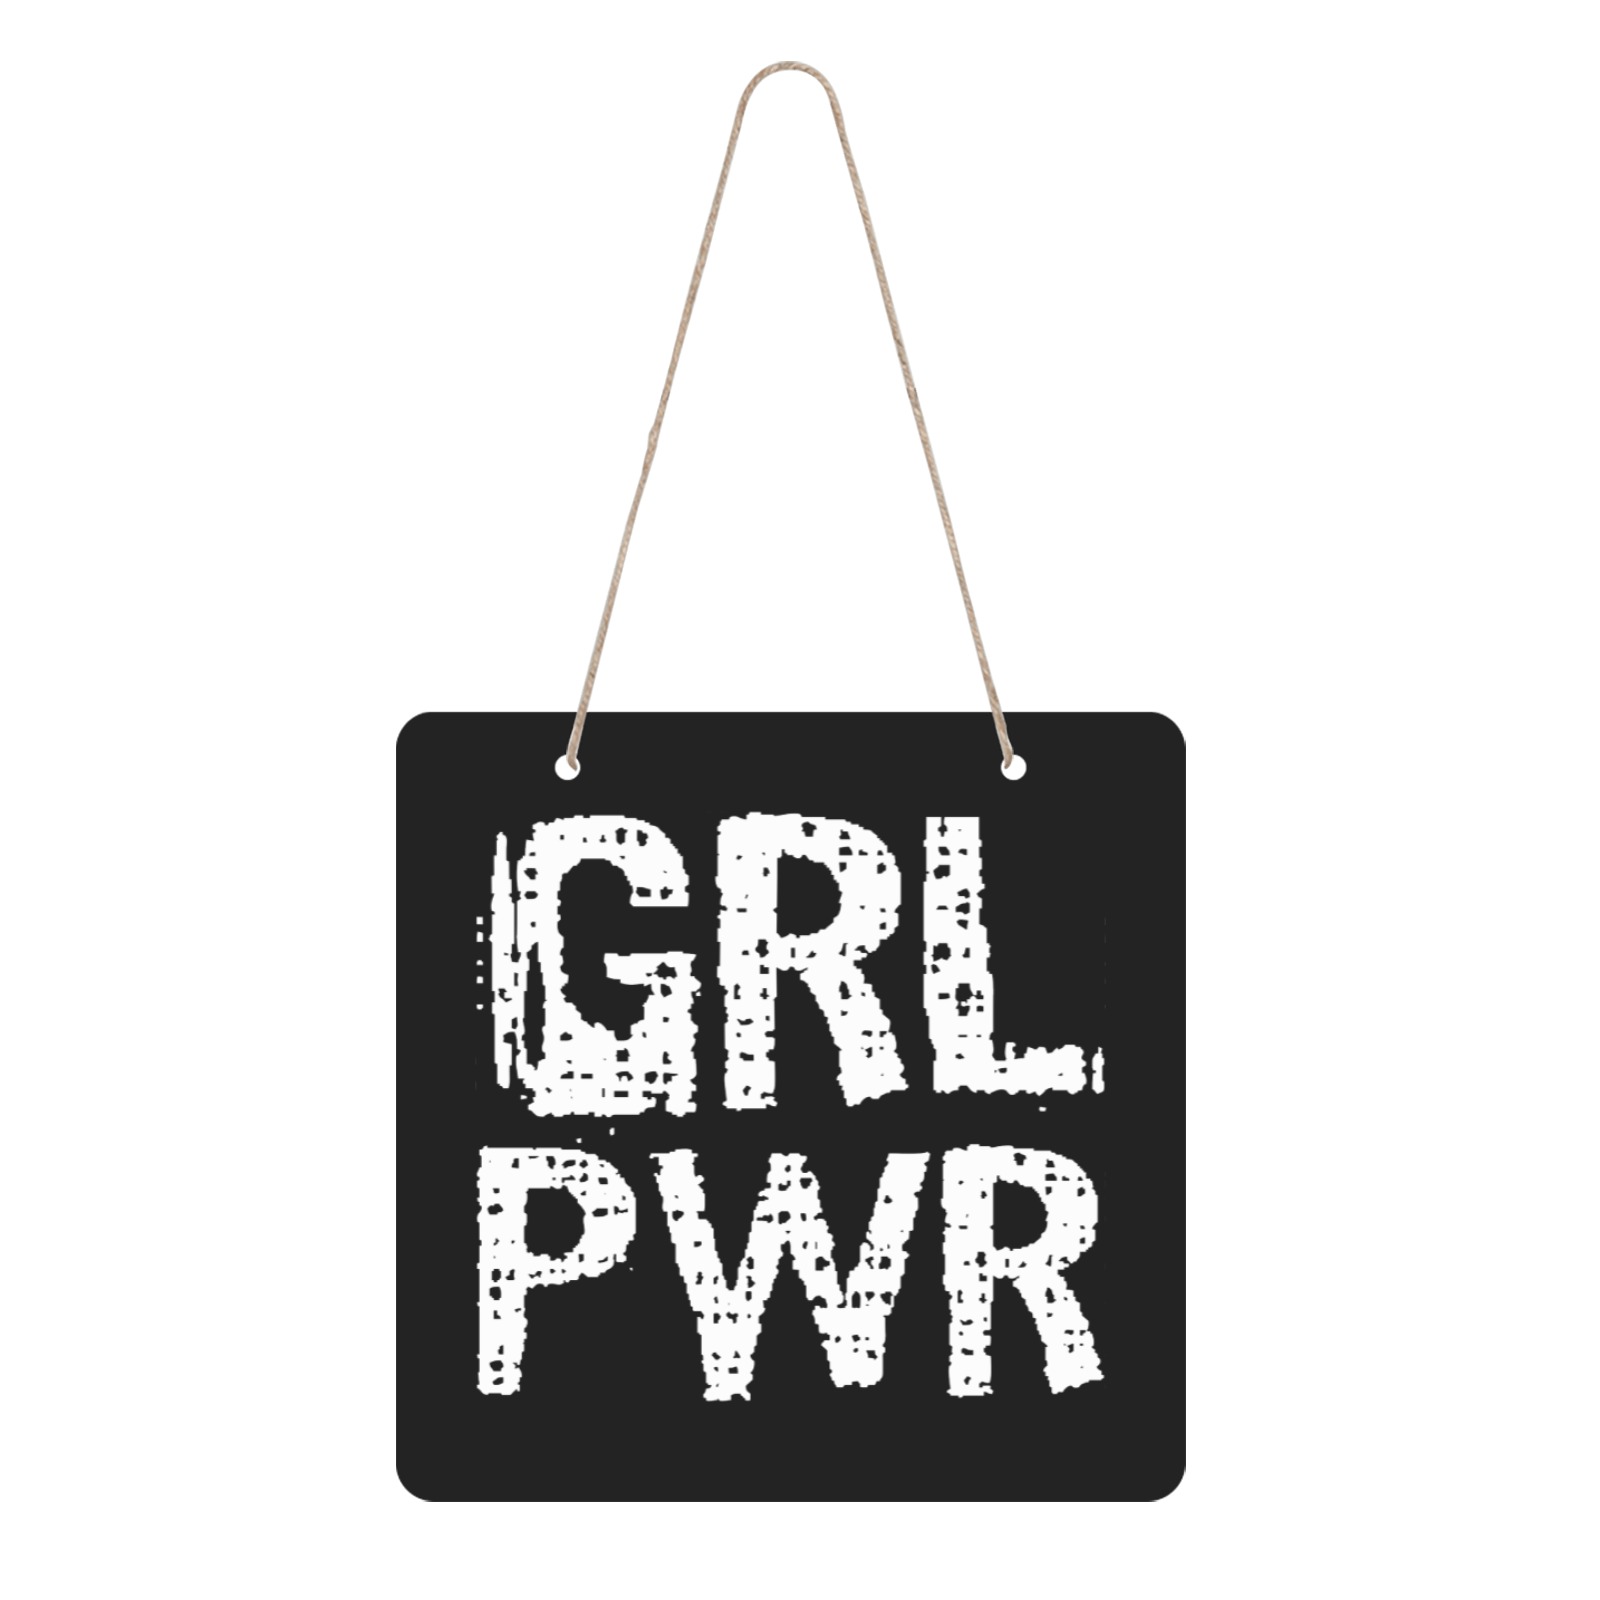 GRL PWR - Girl Power stunning white text. Square Wood Door Hanging Sign